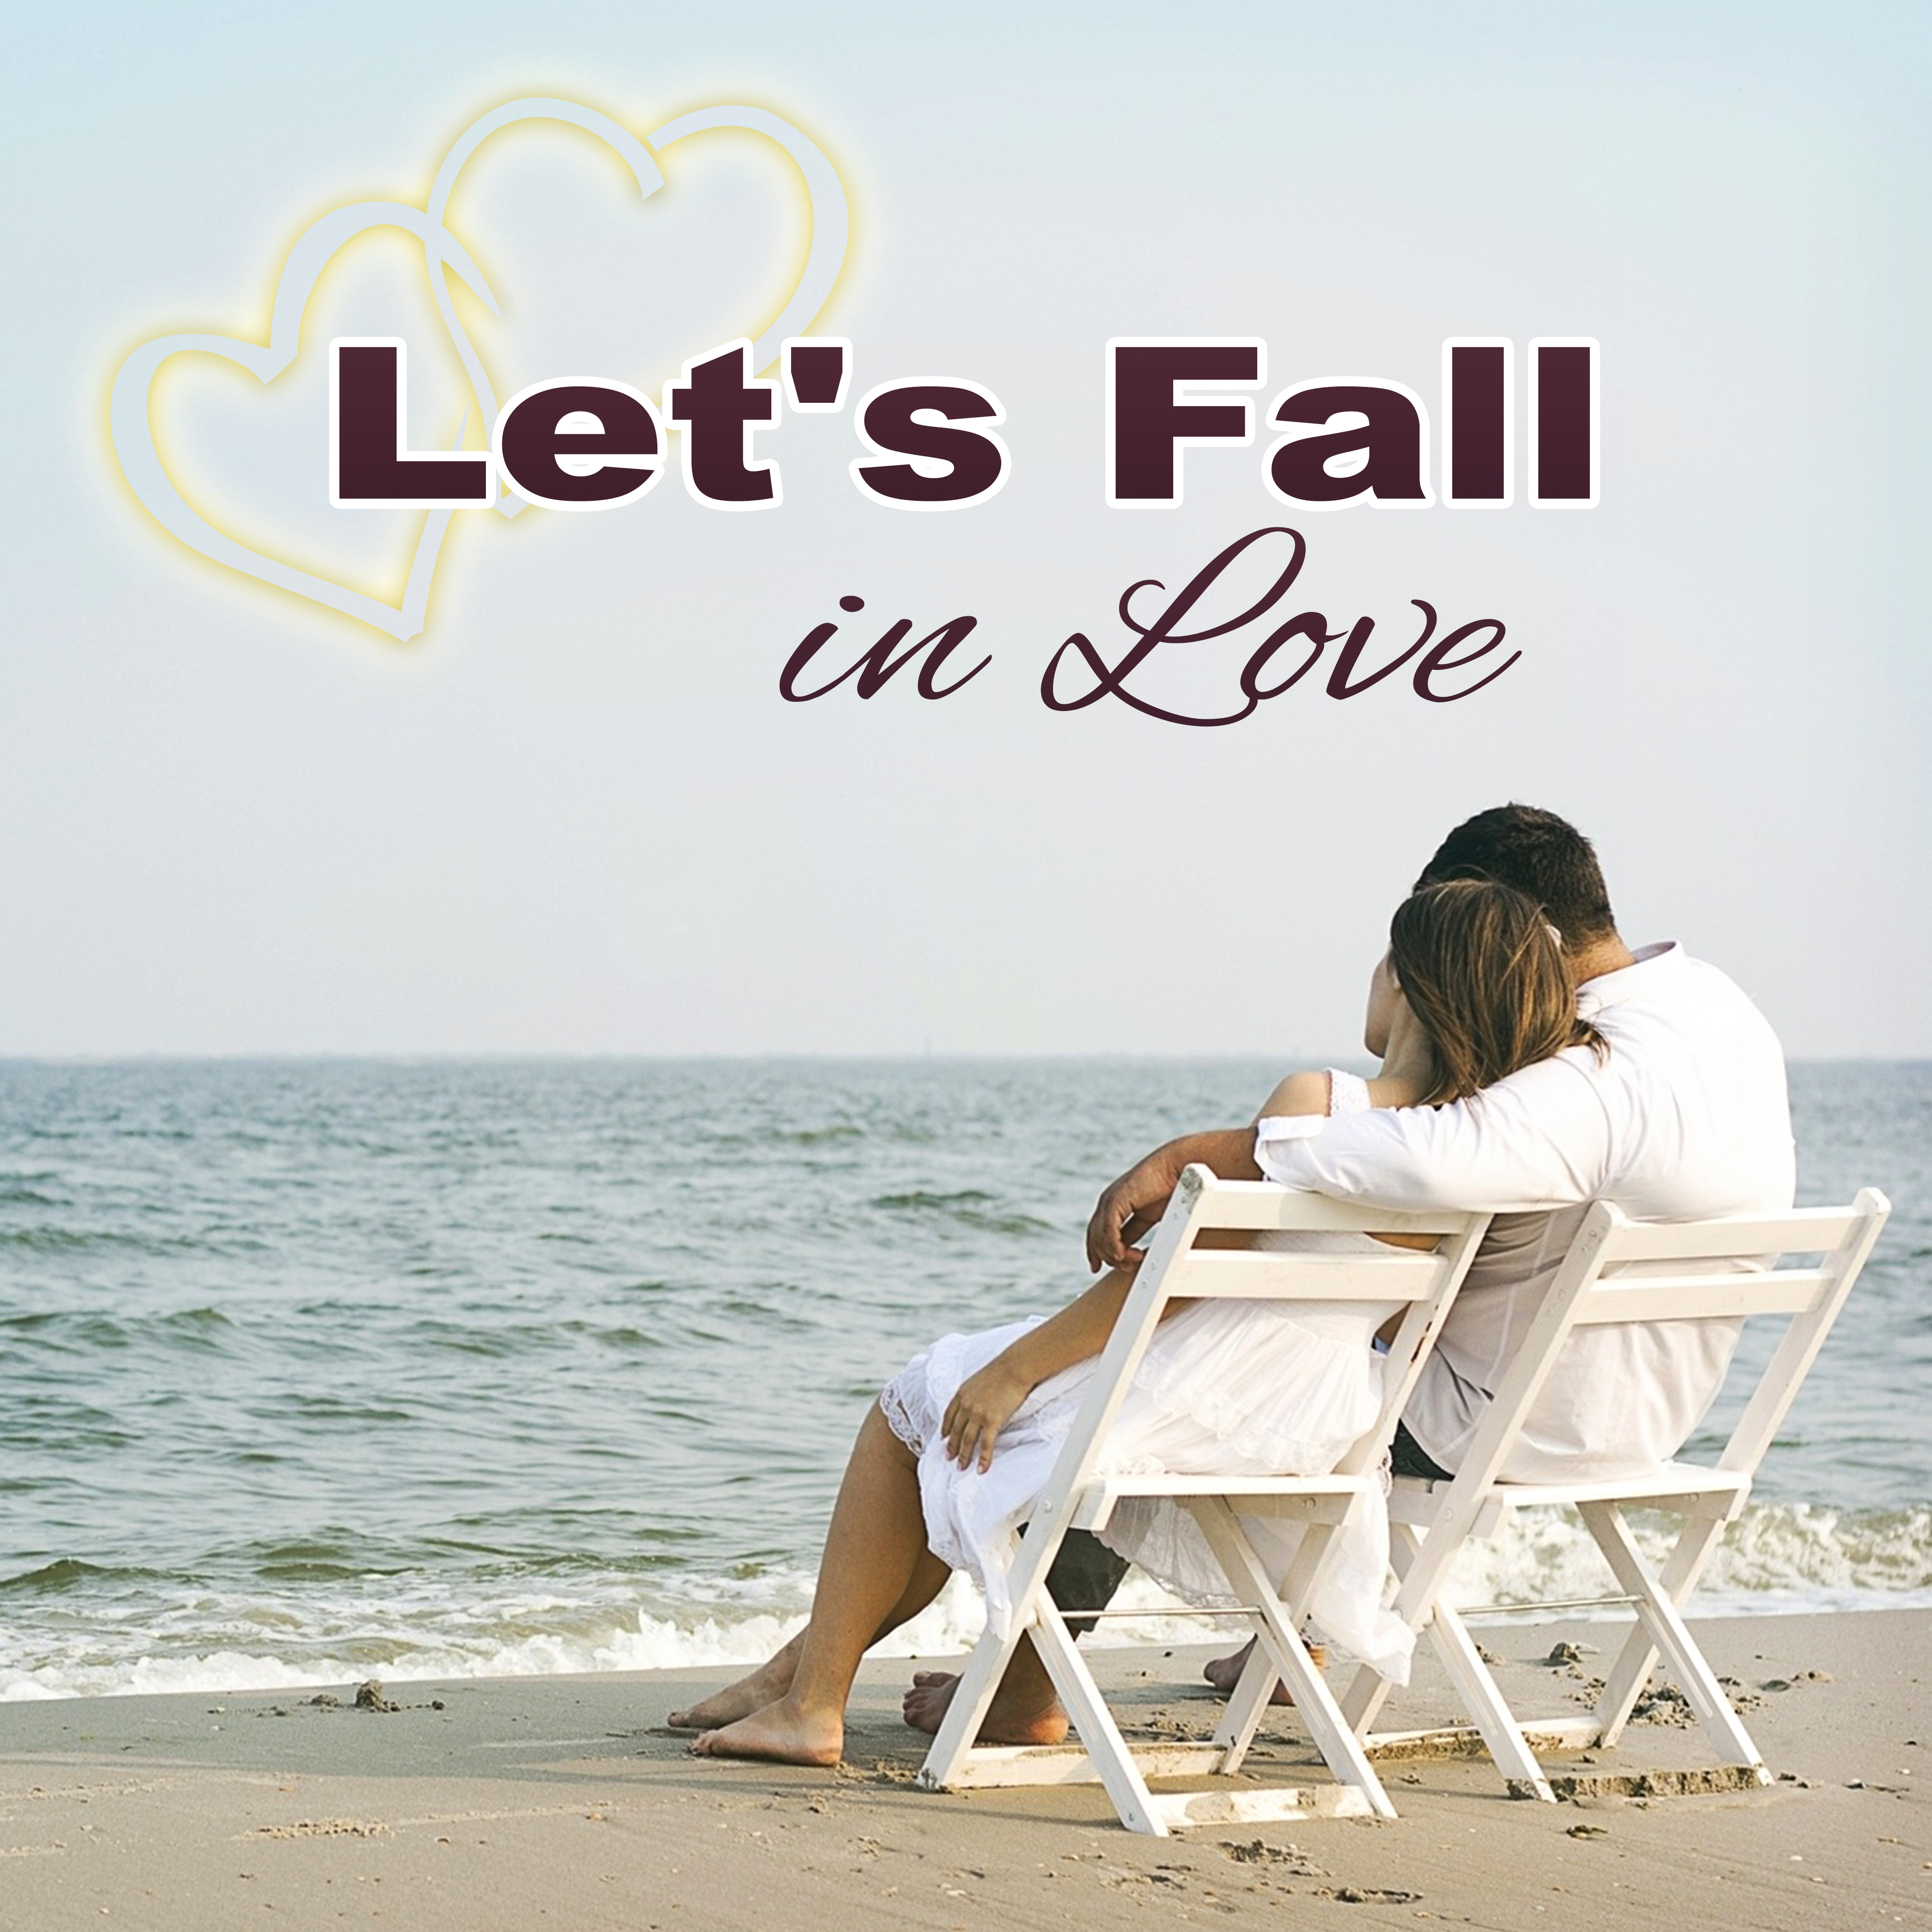 Let's Fall in Love - Smooth Jazz Club, Intimate Moments, Total Relax for Lovers, Piano Session